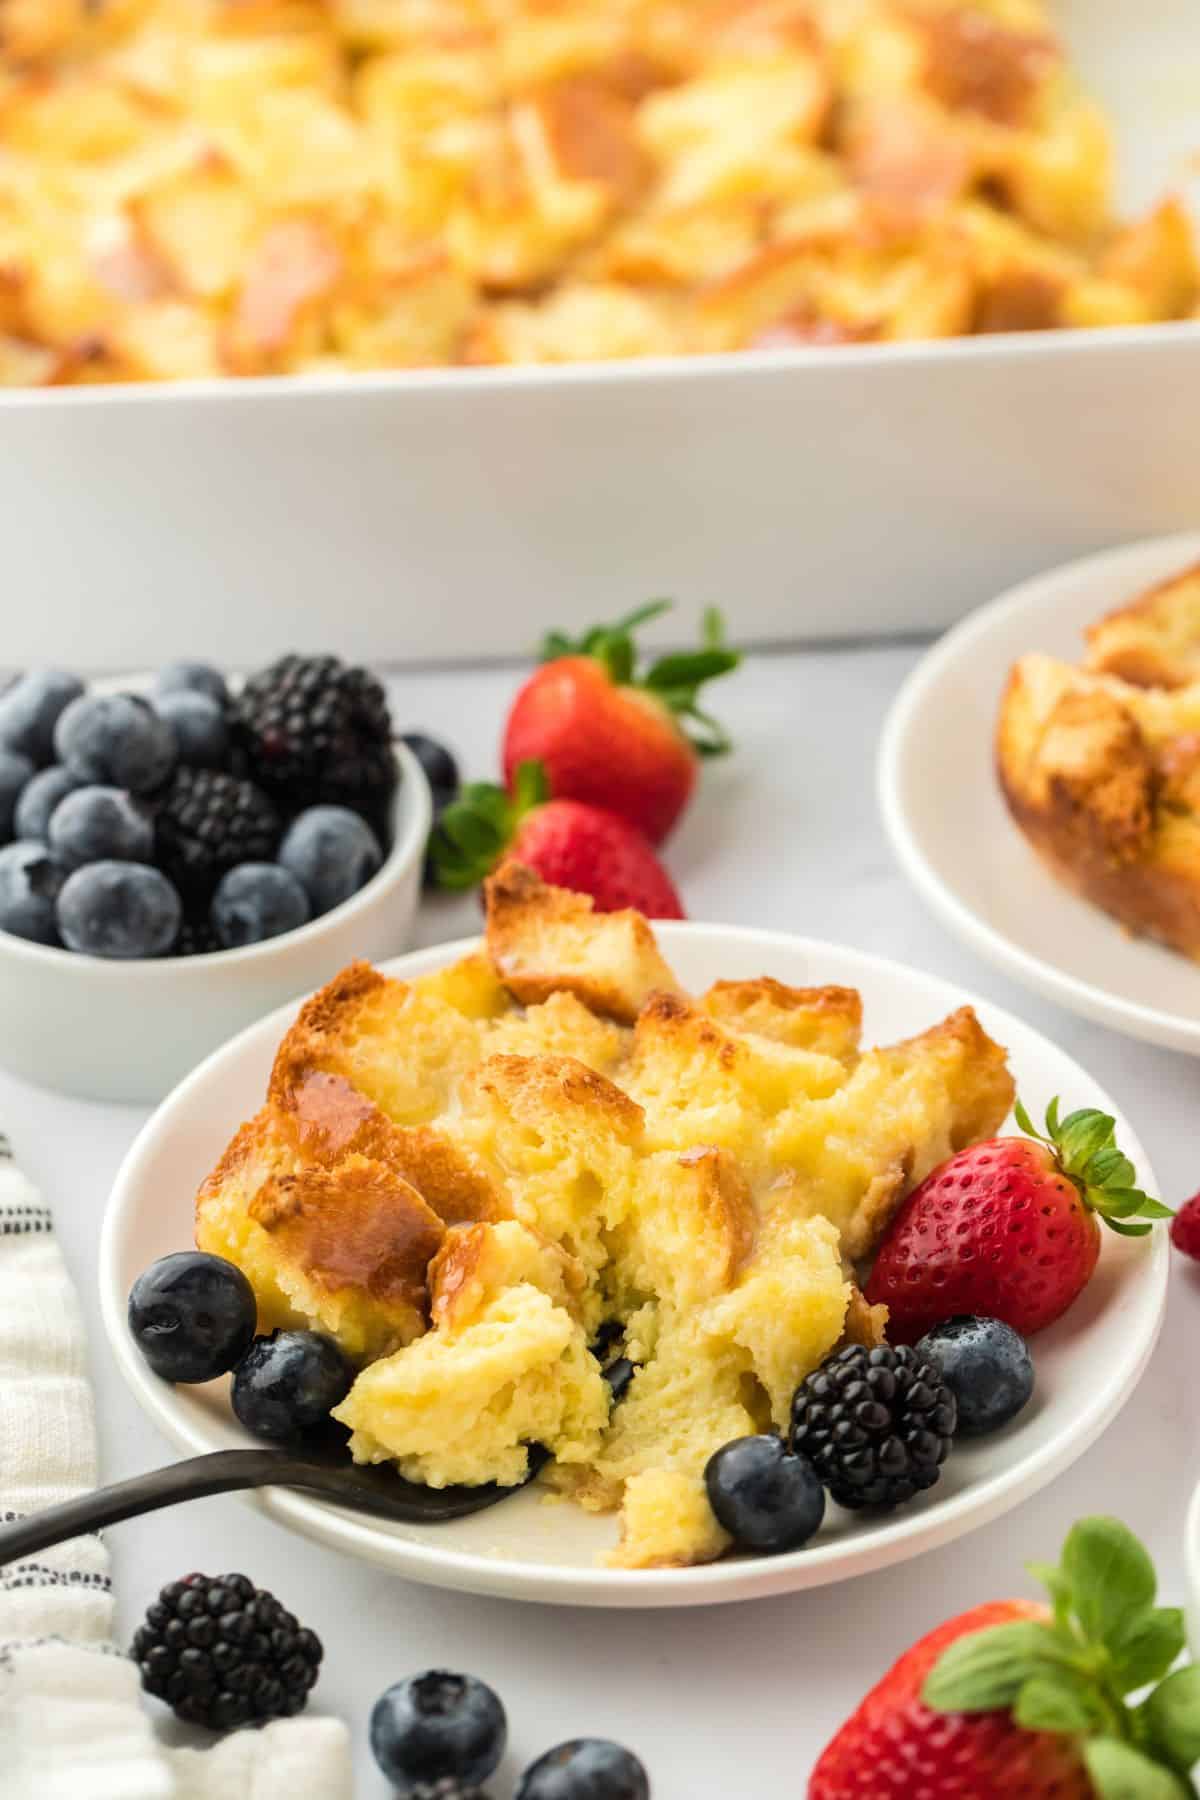 A white plate with a serving of white chocolate bread pudding with a black fork and berries next to it. In the background, there's a baking dish with more bread pudding, and a small bowl filled with an assortment of fresh berries like strawberries, blueberries, and blackberries